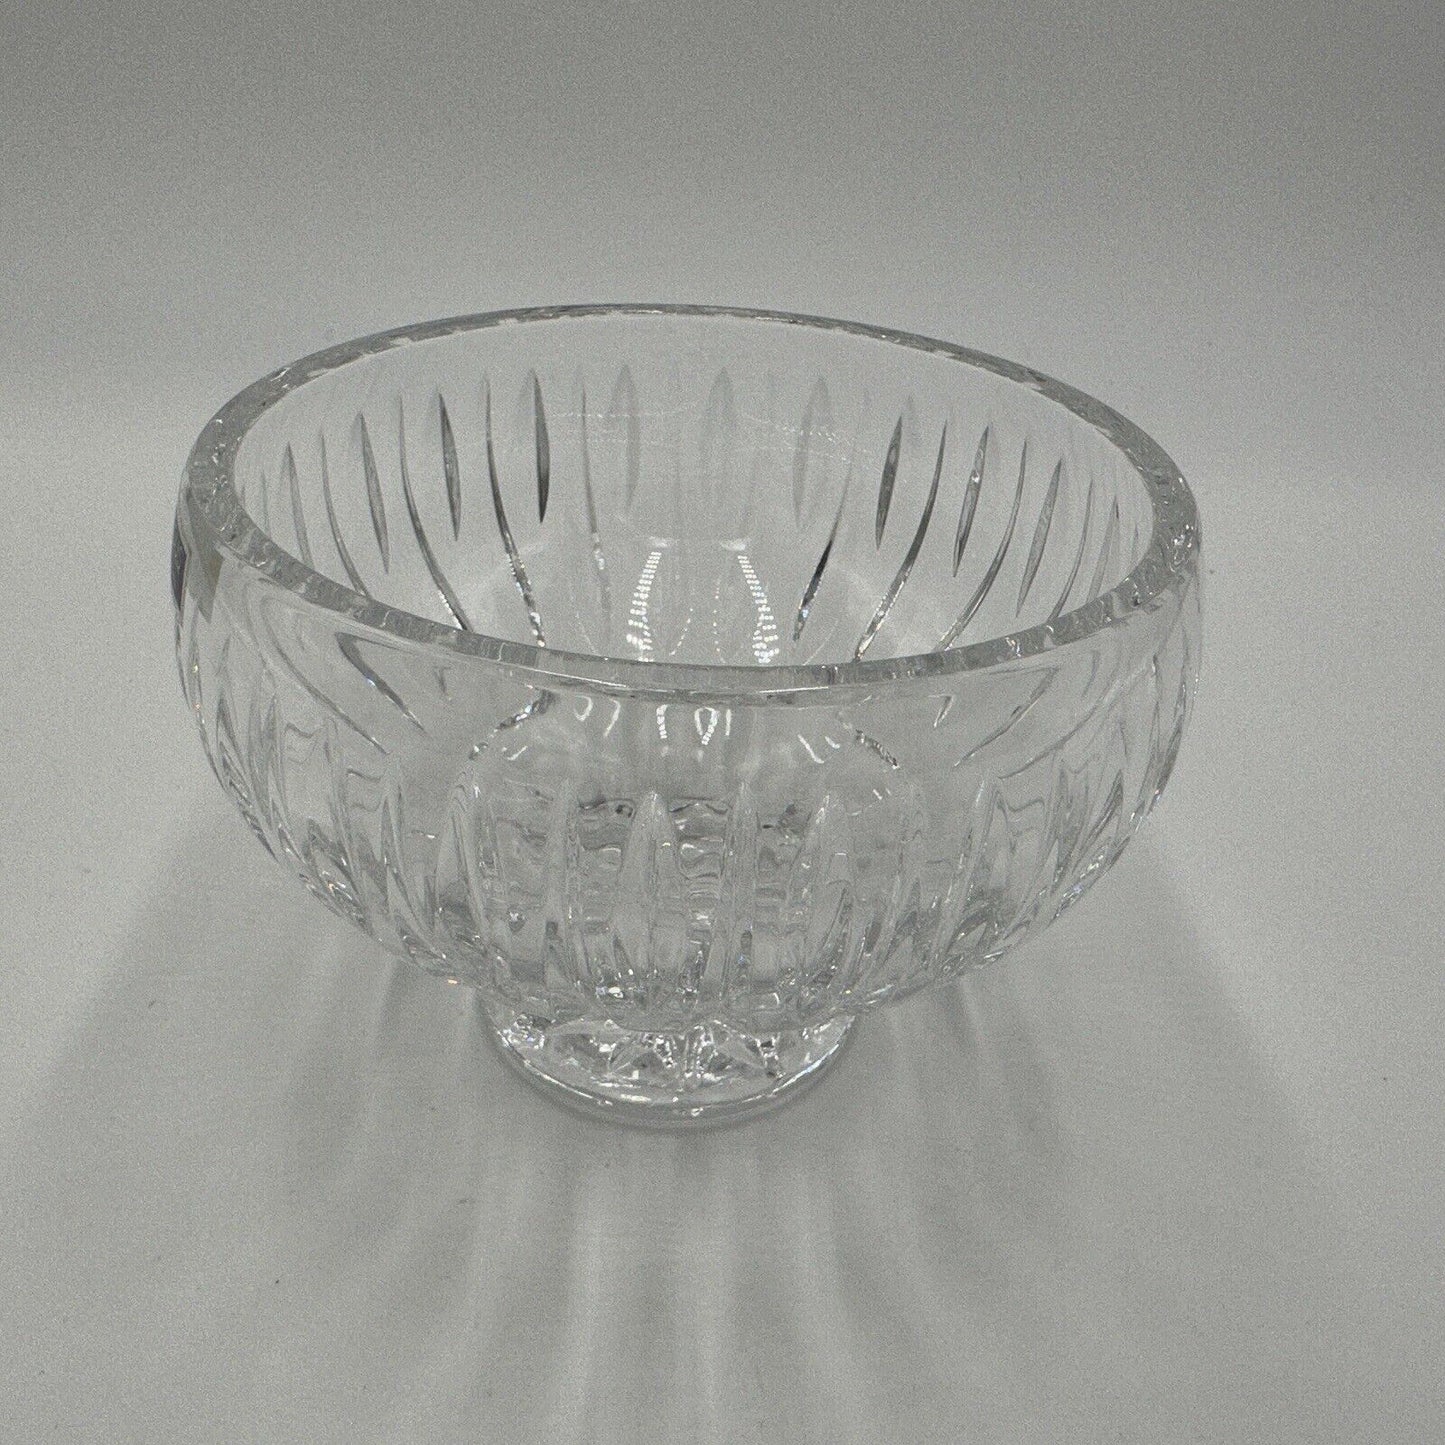 Marquis by Waterford Crystal Sheridan Footed Bowl Vintage 5 inch Centerpiece